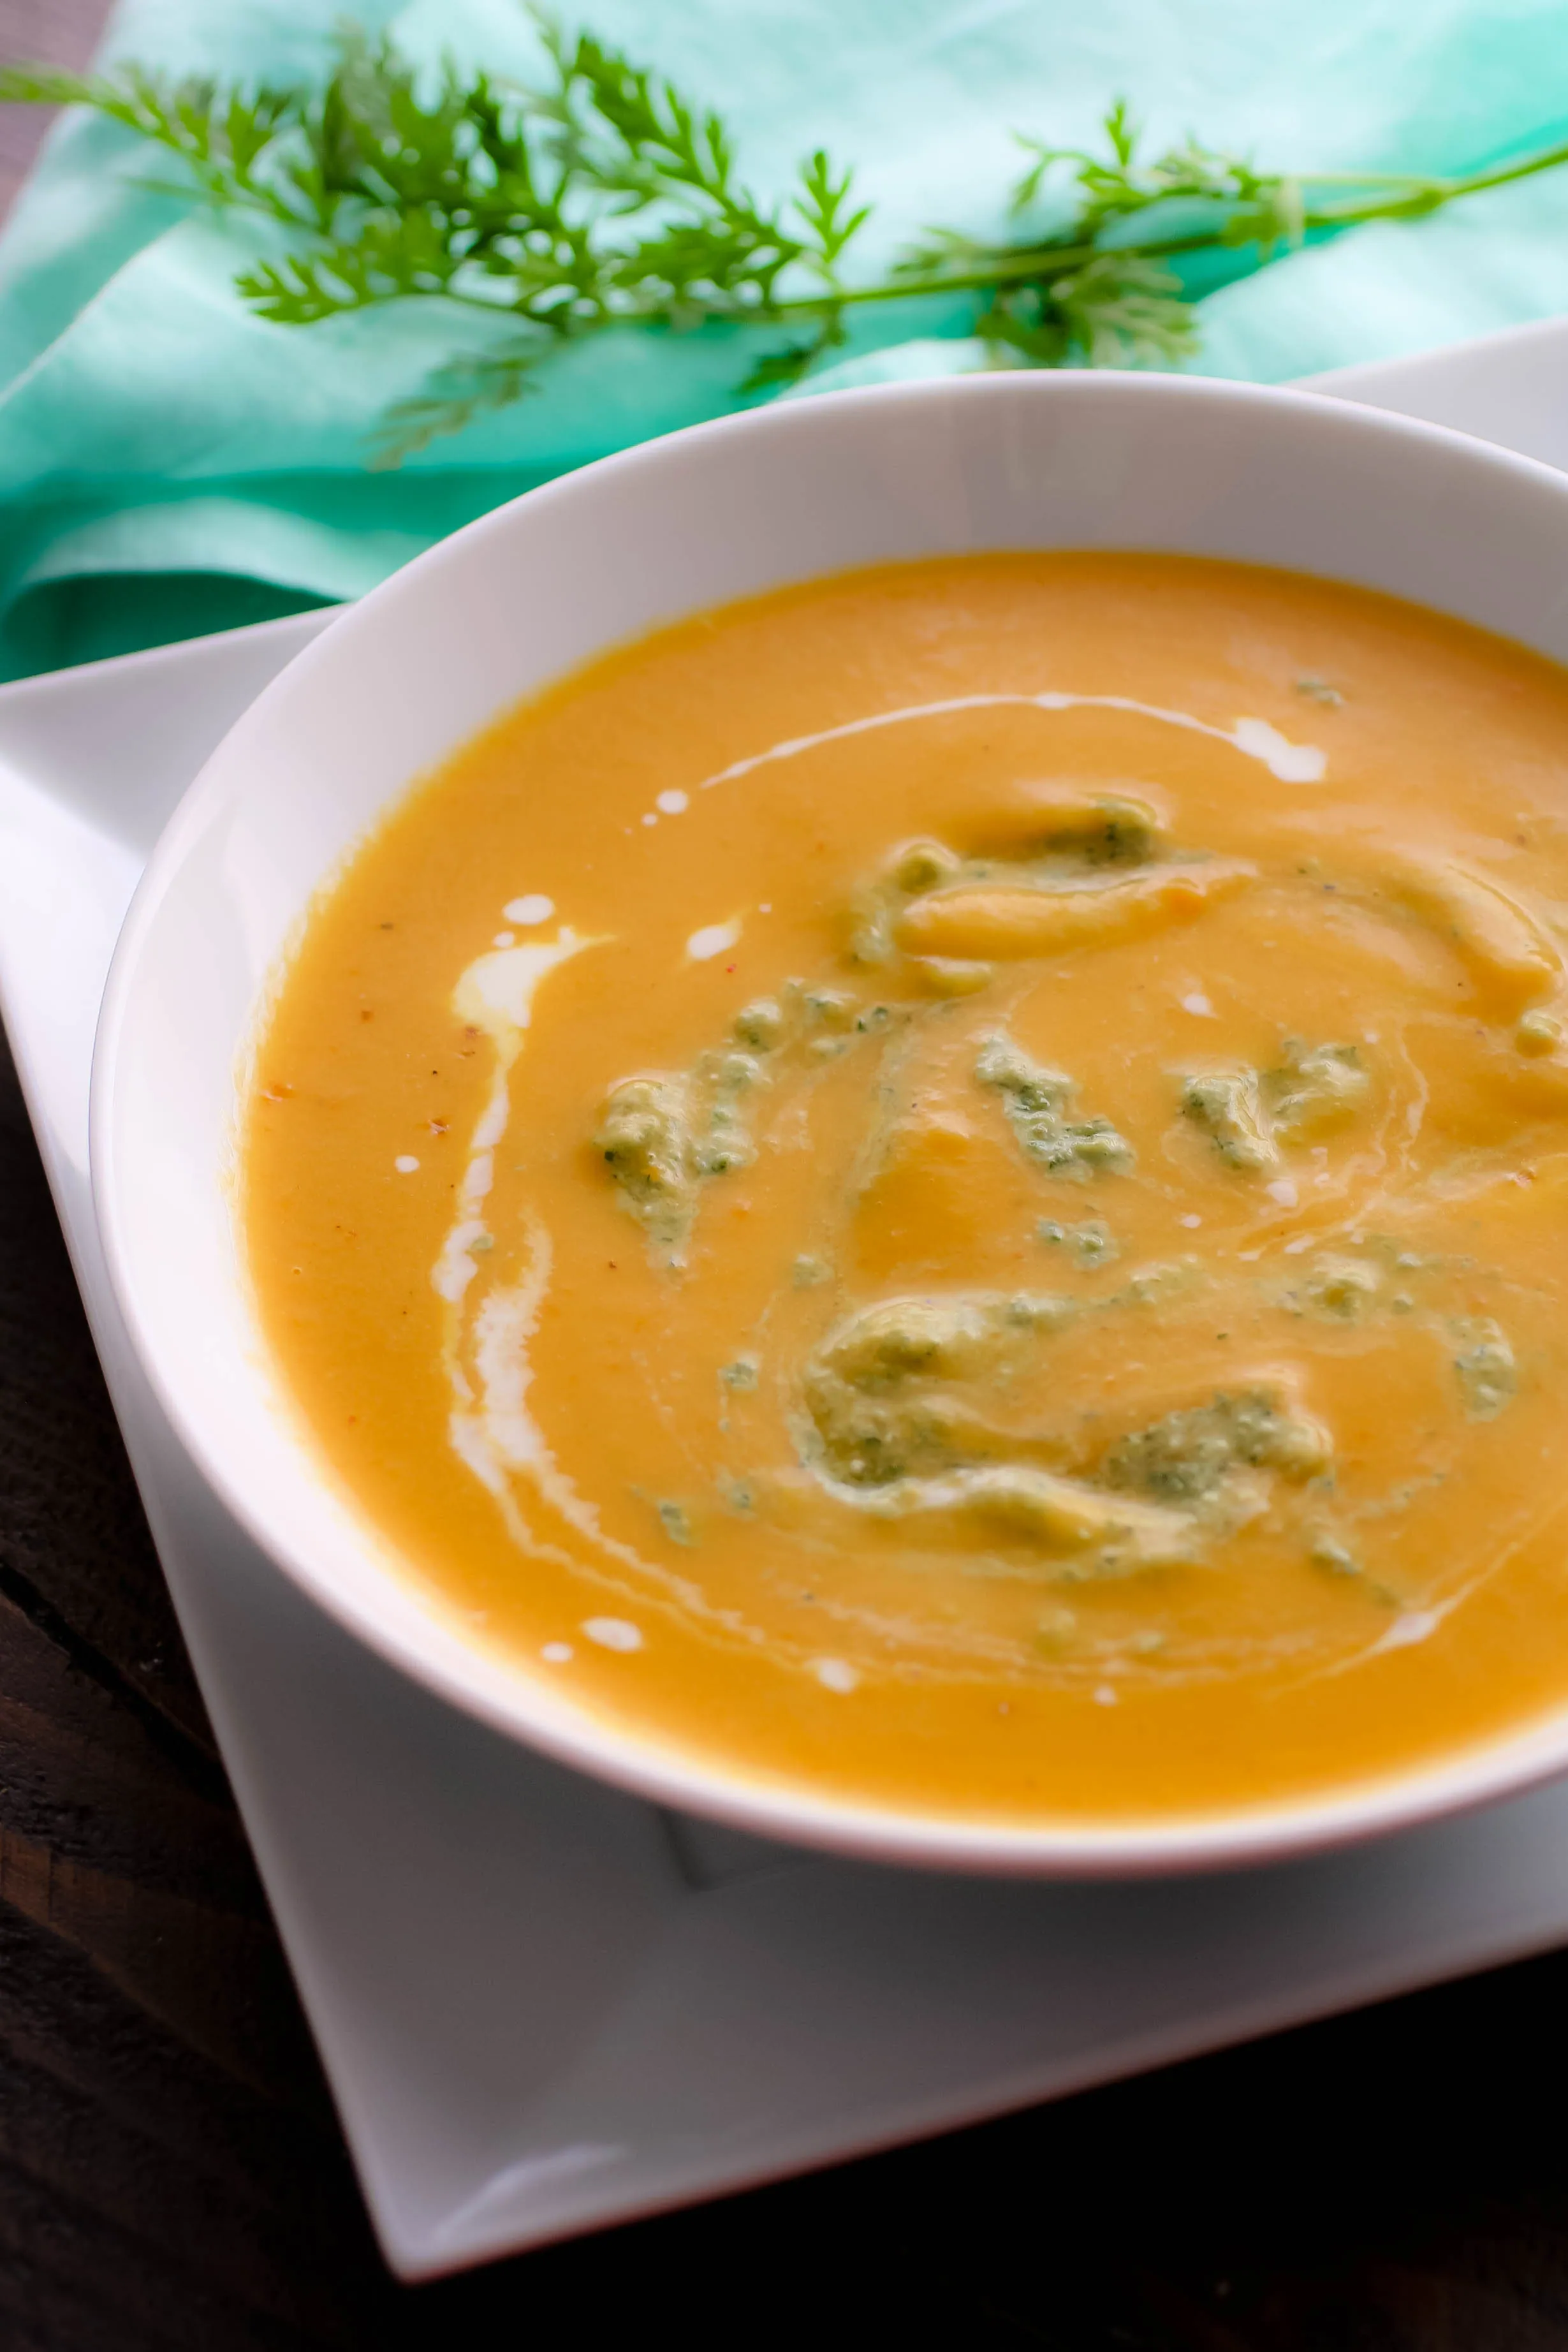 Roasted Carrot and Parsnip Soup with Carrot Greens Pesto is a delightful dish that's easy to make, too. Enjoy Roasted Carrot and Parsnip Soup with Carrot Greens Pesto for its great flavor!